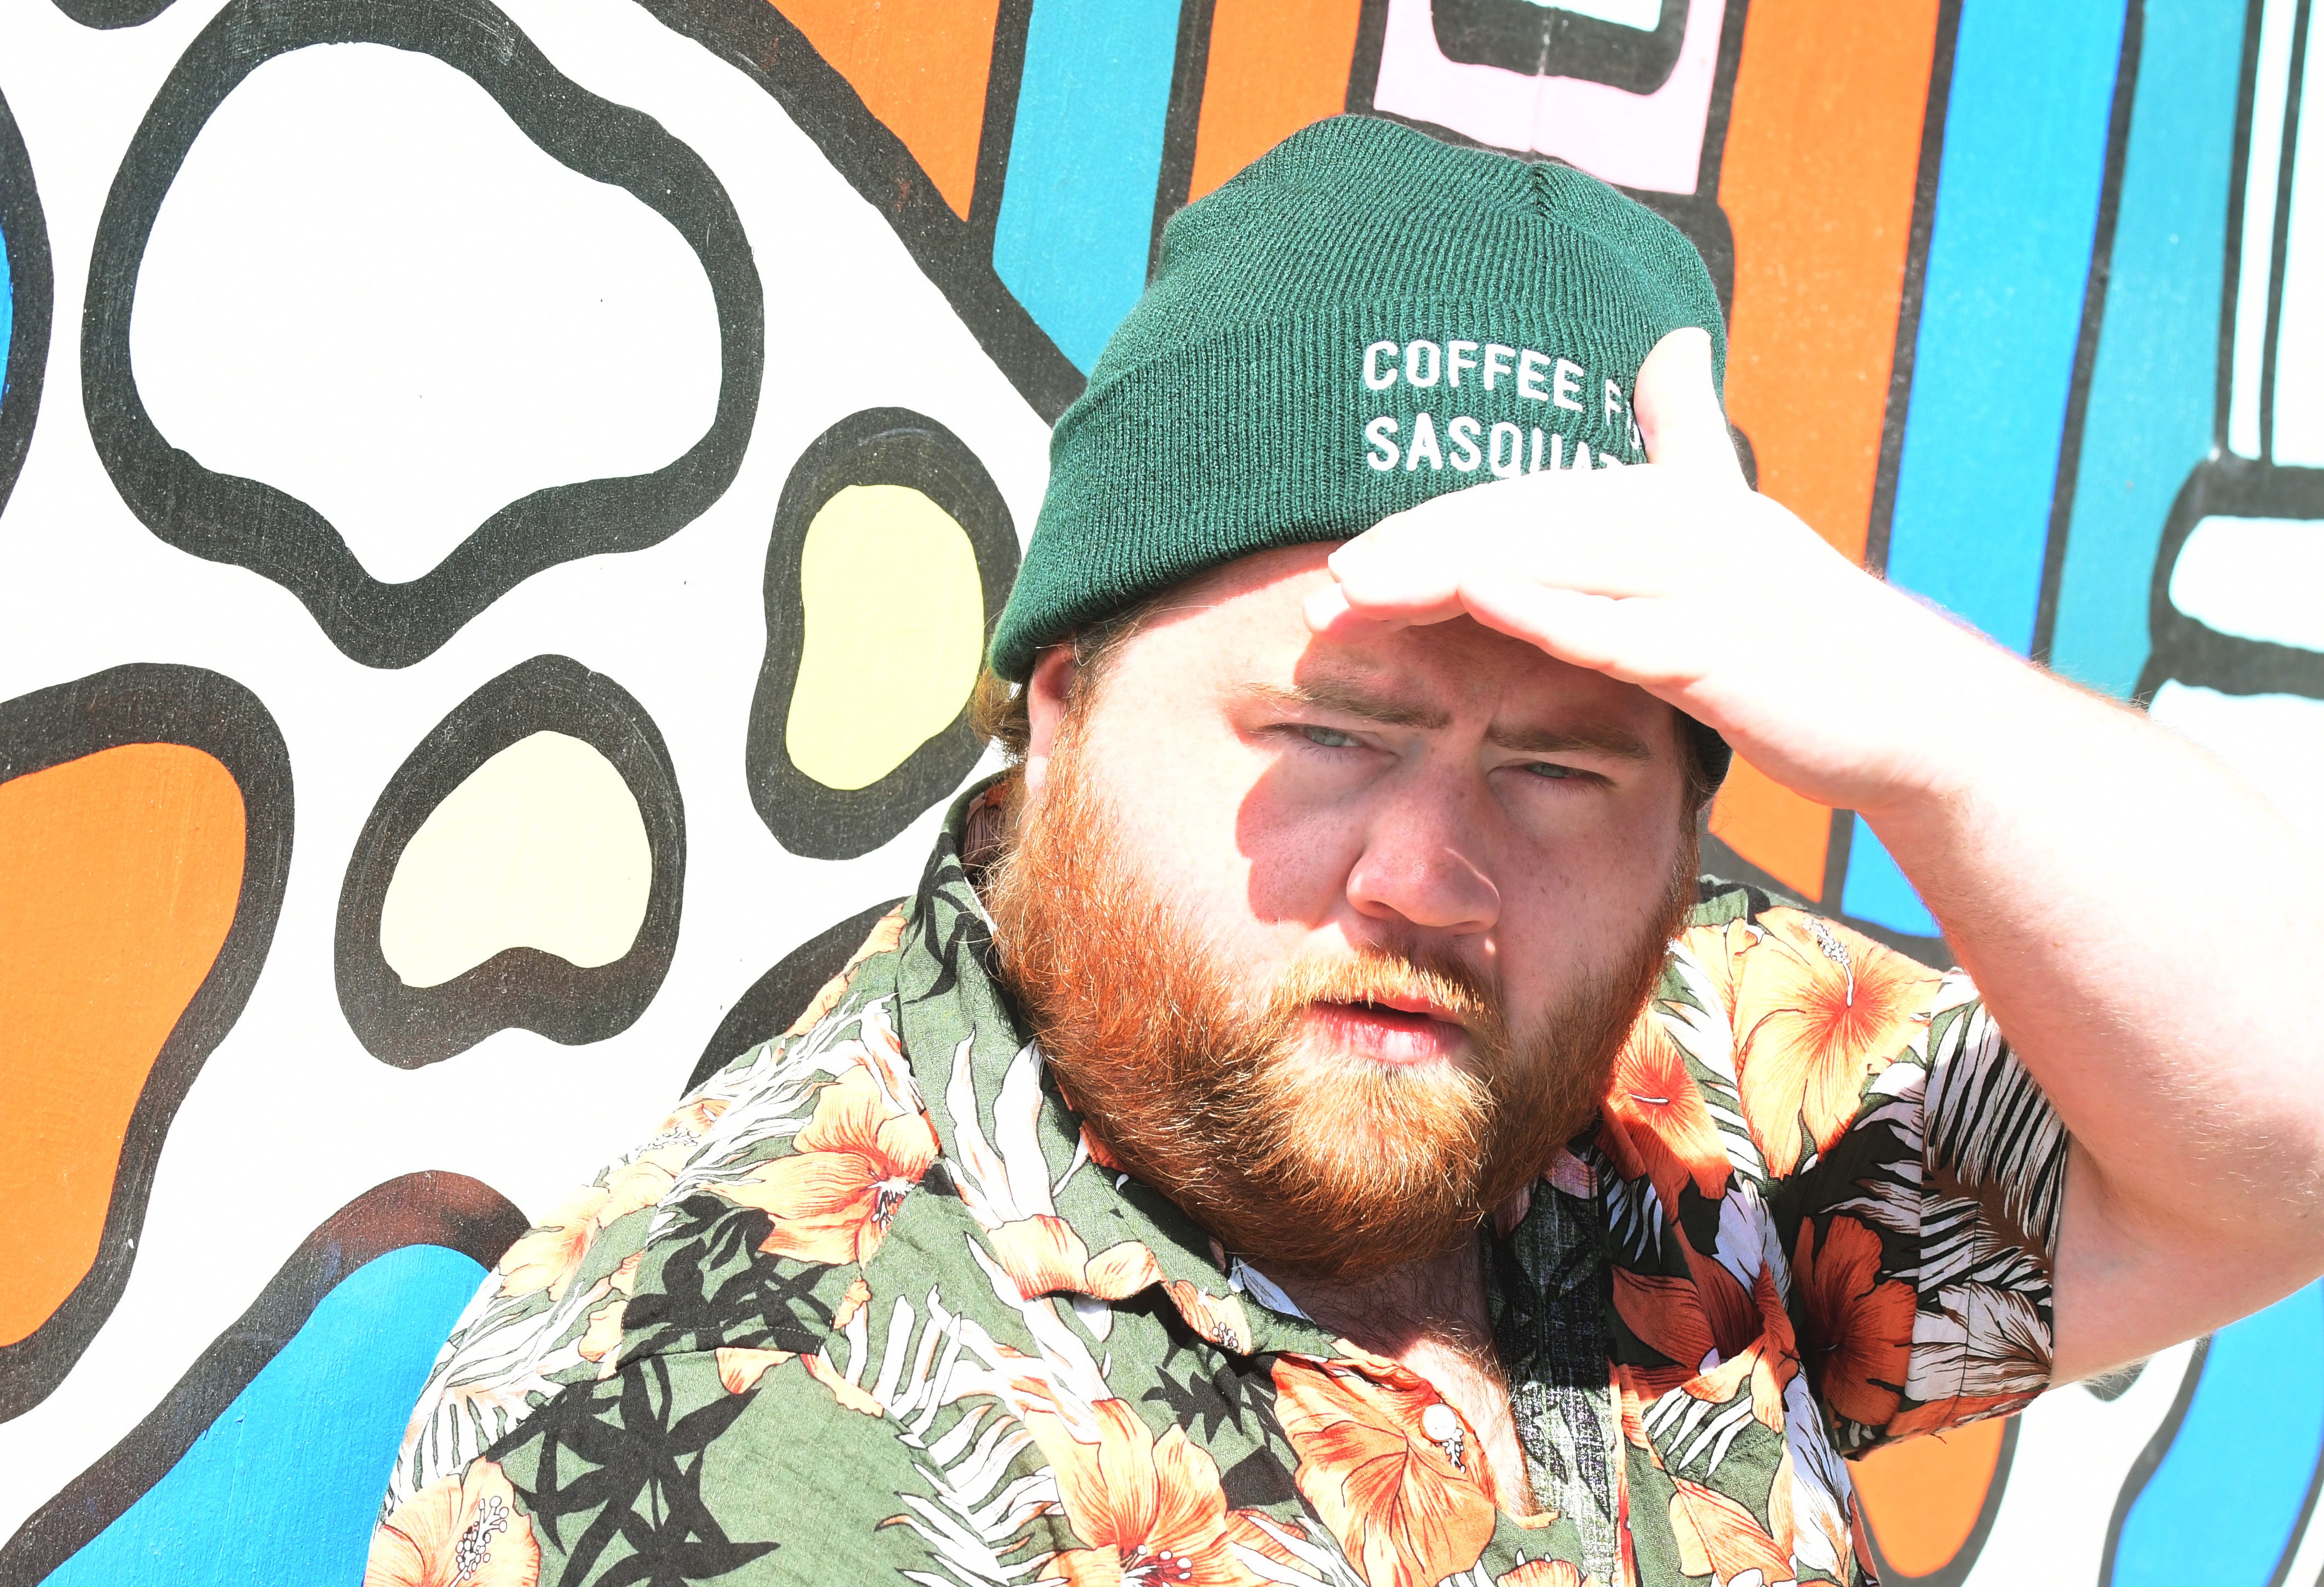 Actor Paul Walter Hauser, in front of a mural by artist Sydney Veverka, in hometown Saginaw, Michigan on June 9, 2020.